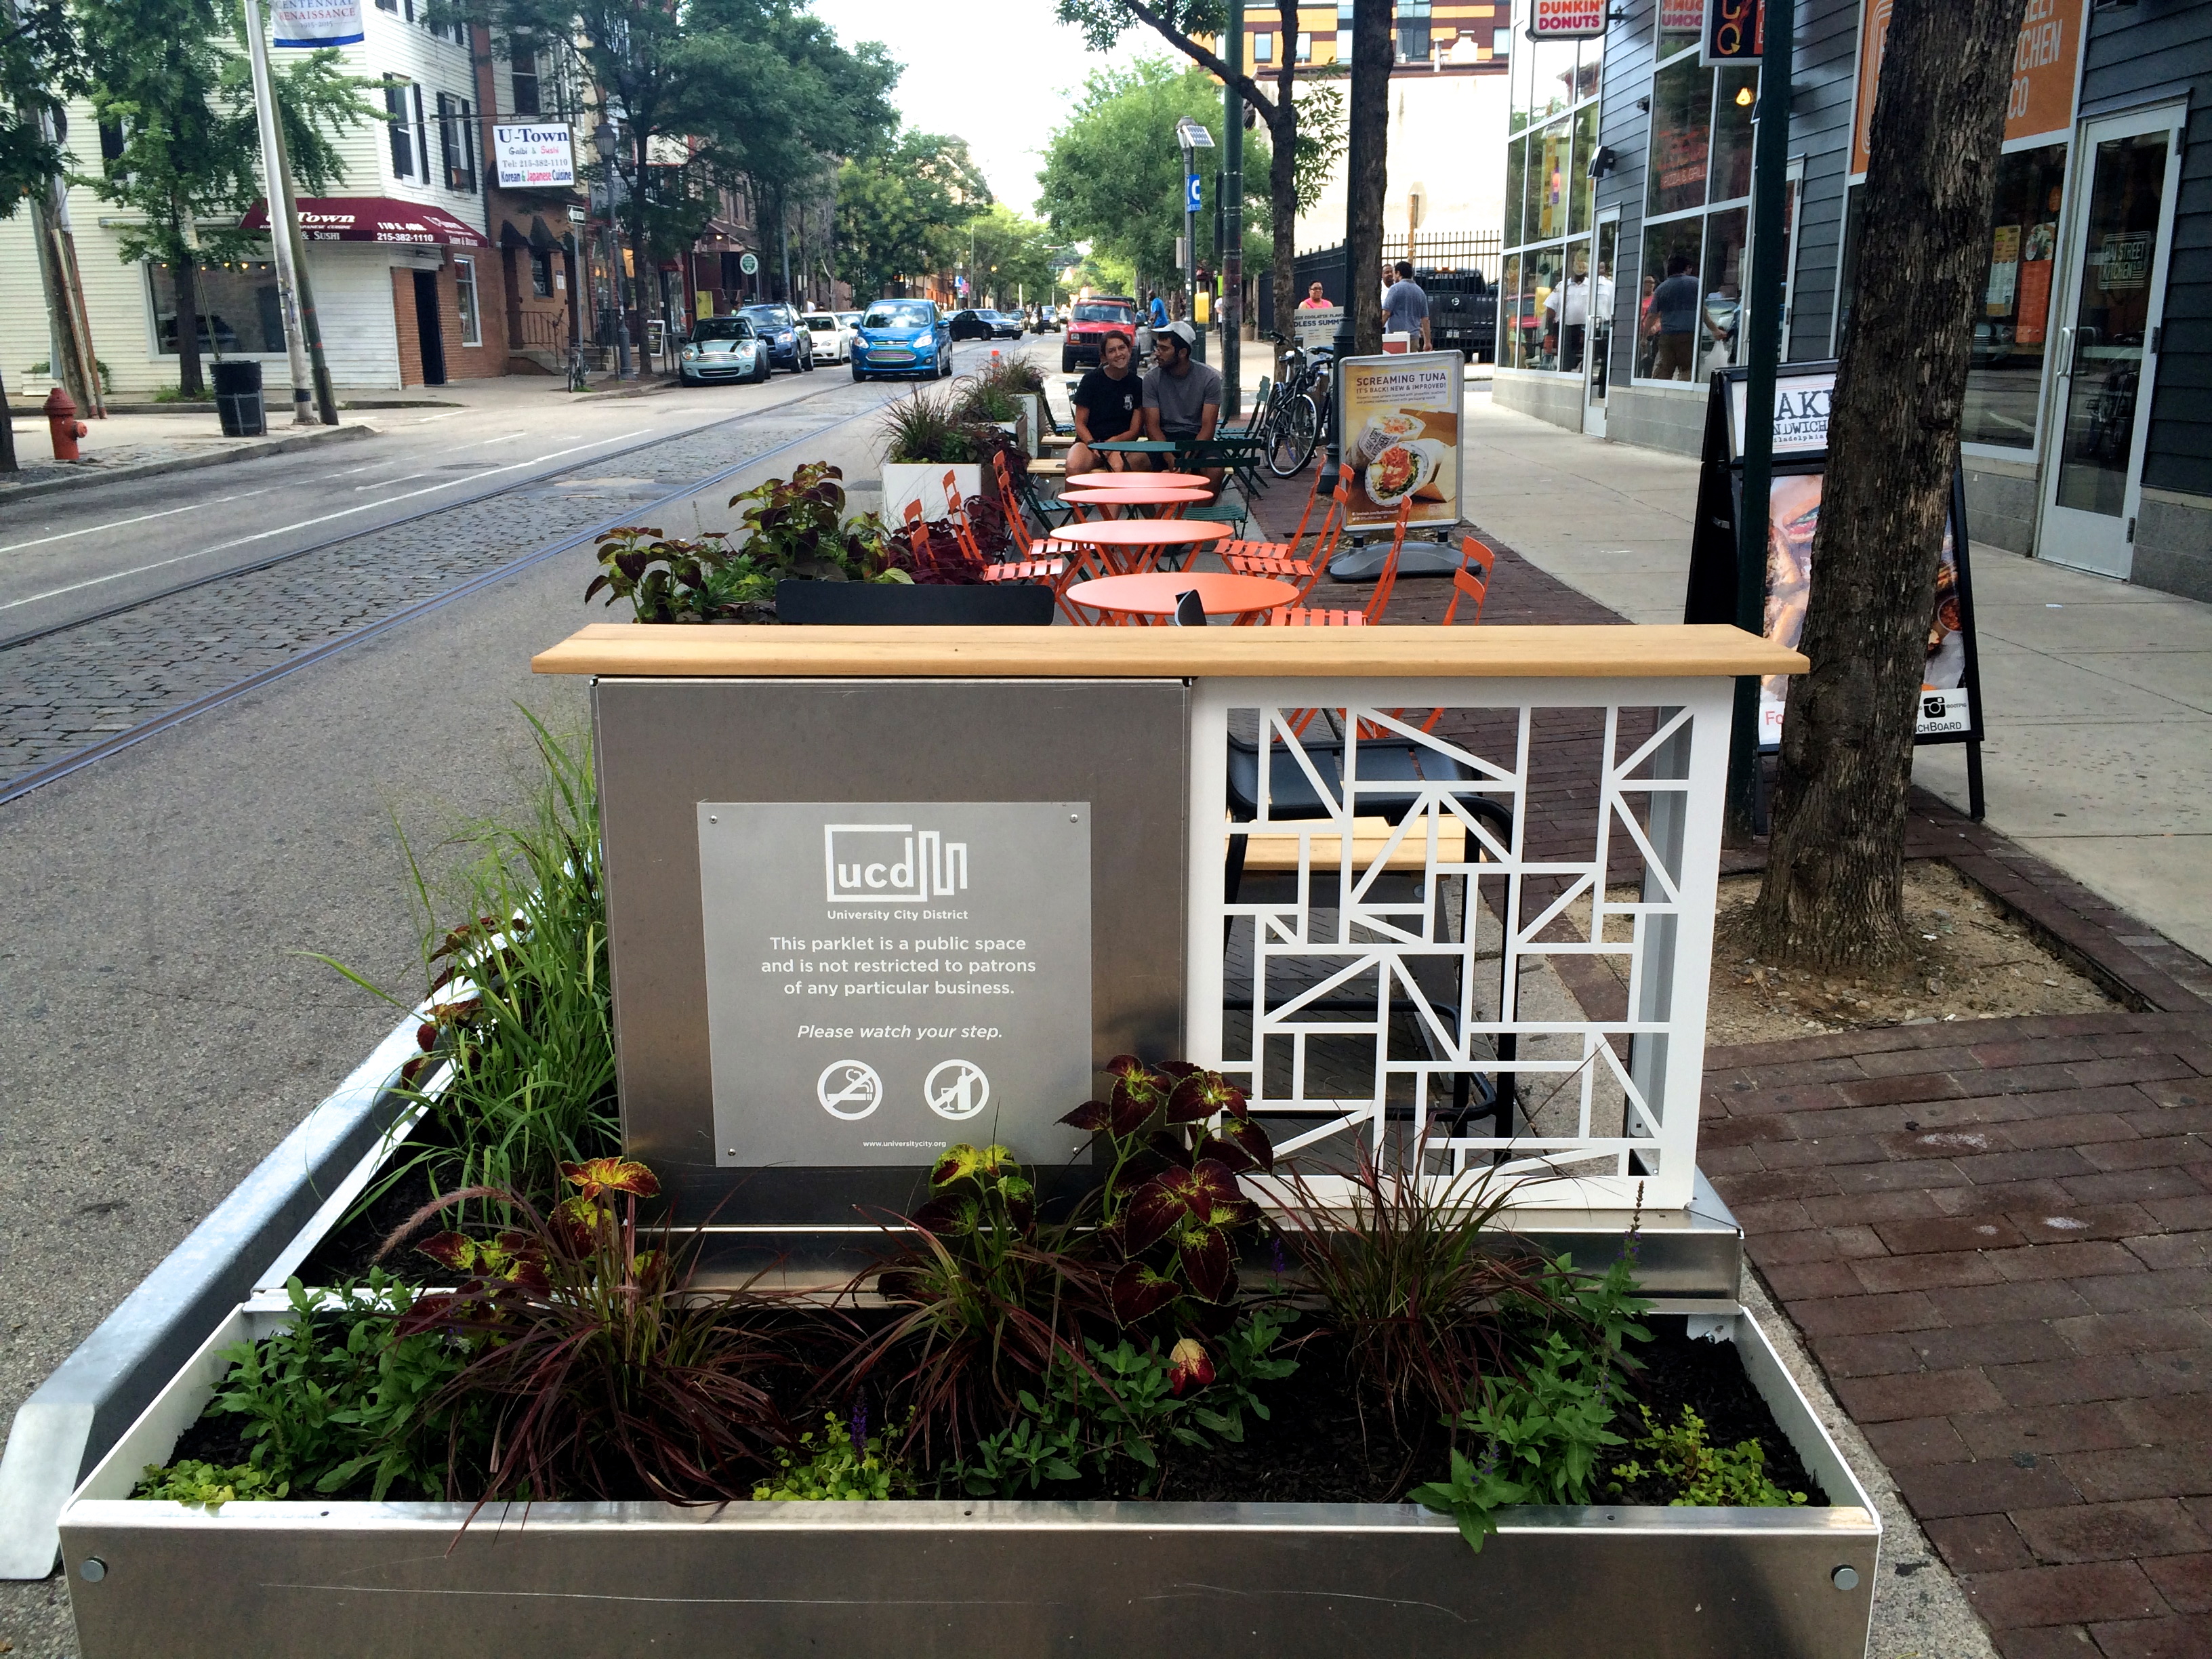 Planters ring the parklet creating a beautified buffer to separate the space from street traffic